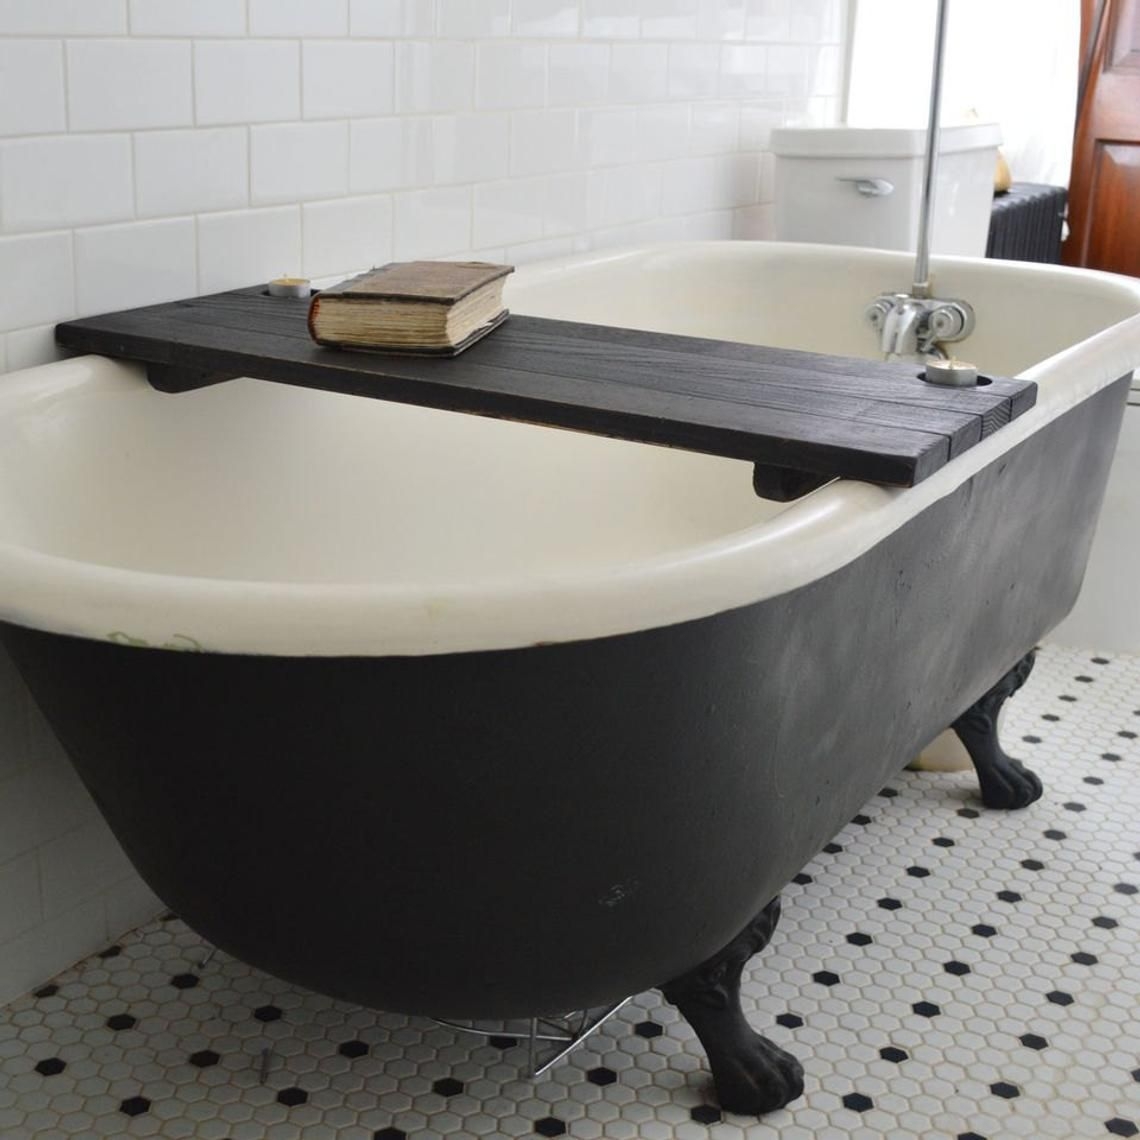 Tub caddy made of reclaimed oak from a